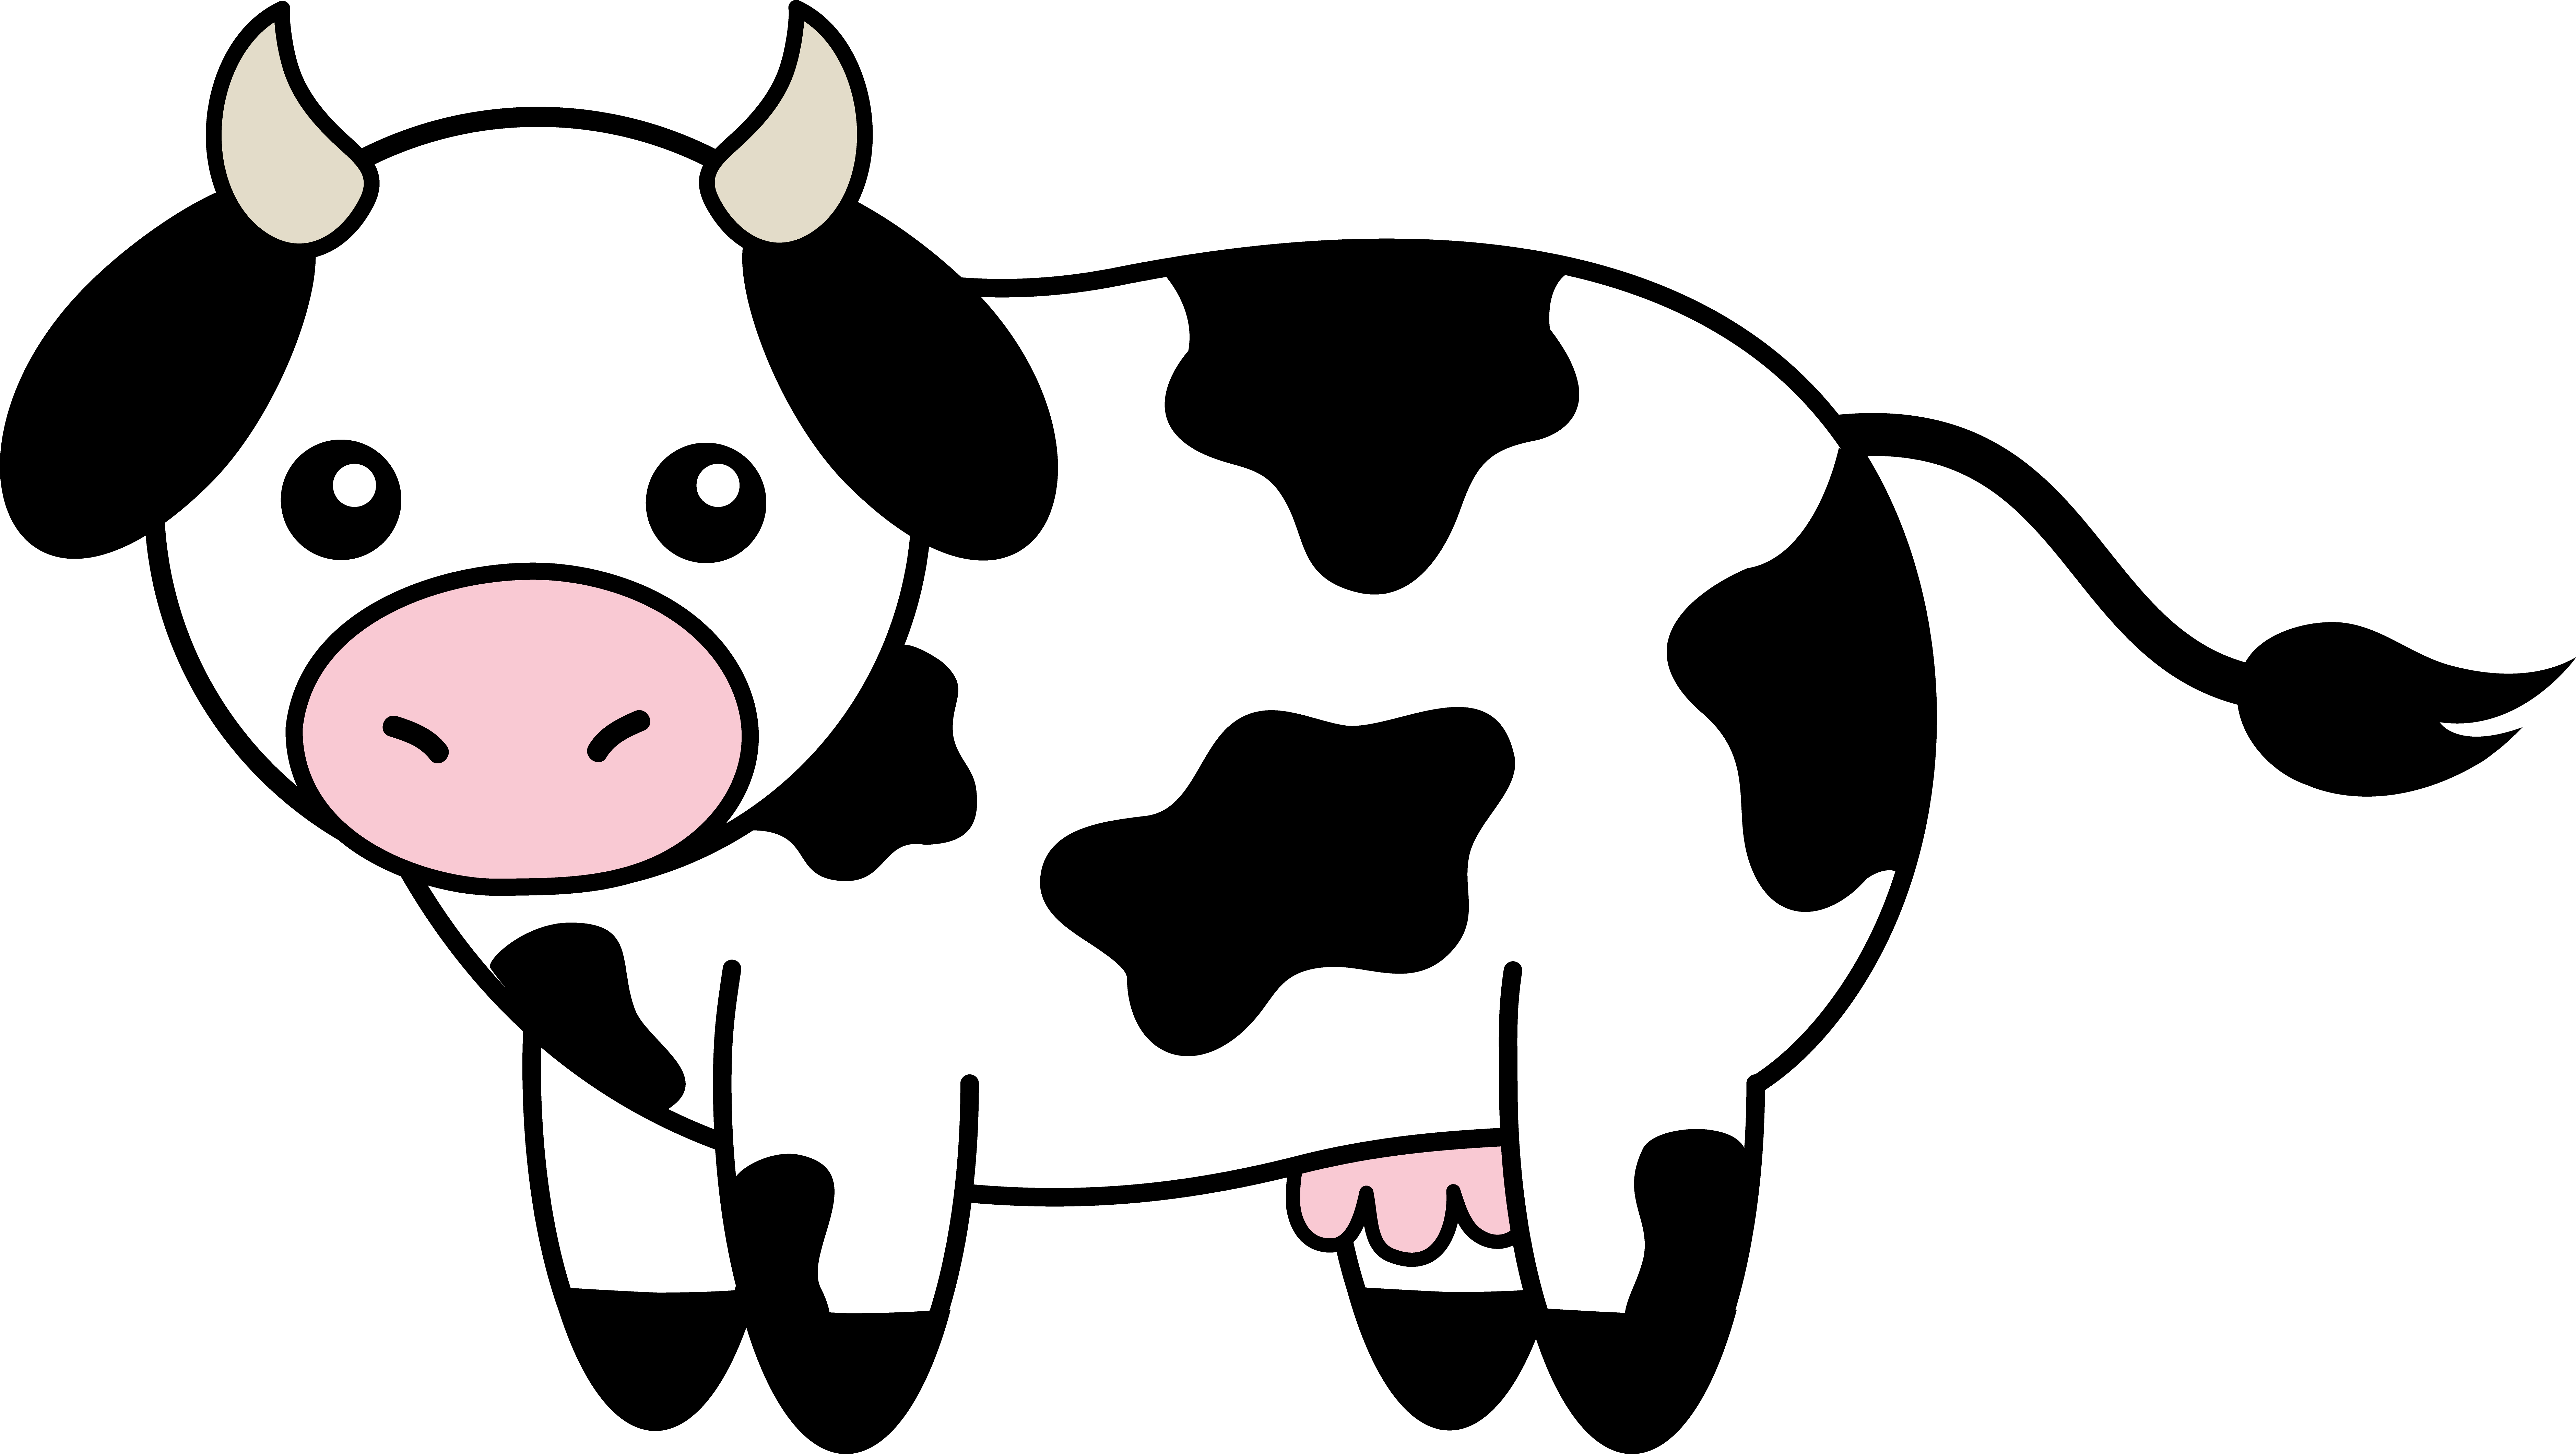 Growth clipart baby. Cartoons wallpaper brown cow